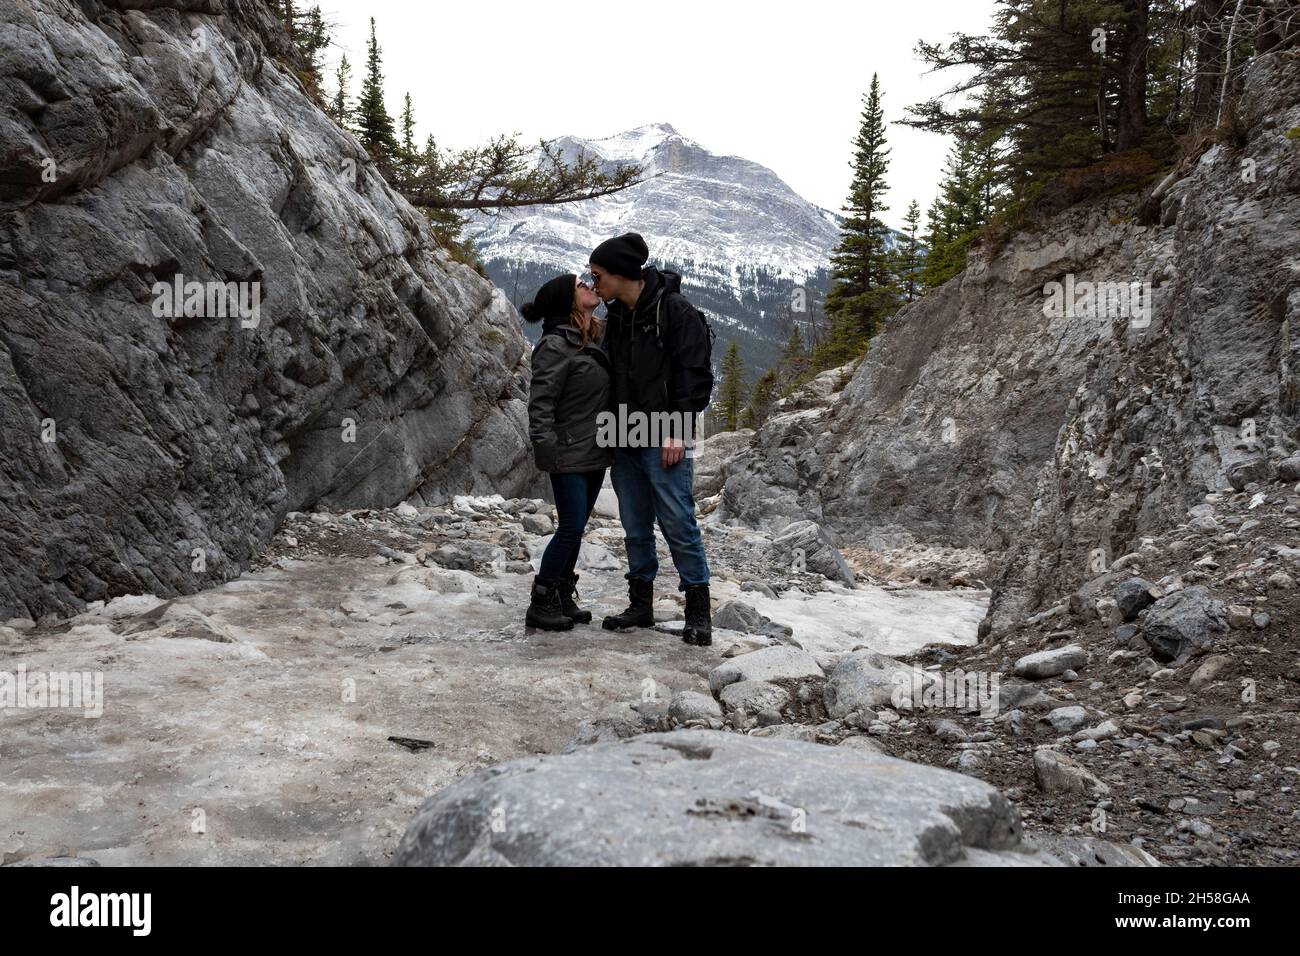 Couple standing on Grotto Mountain kissing. mountains in background. overcast sky. rocks, trees. Stock Photo